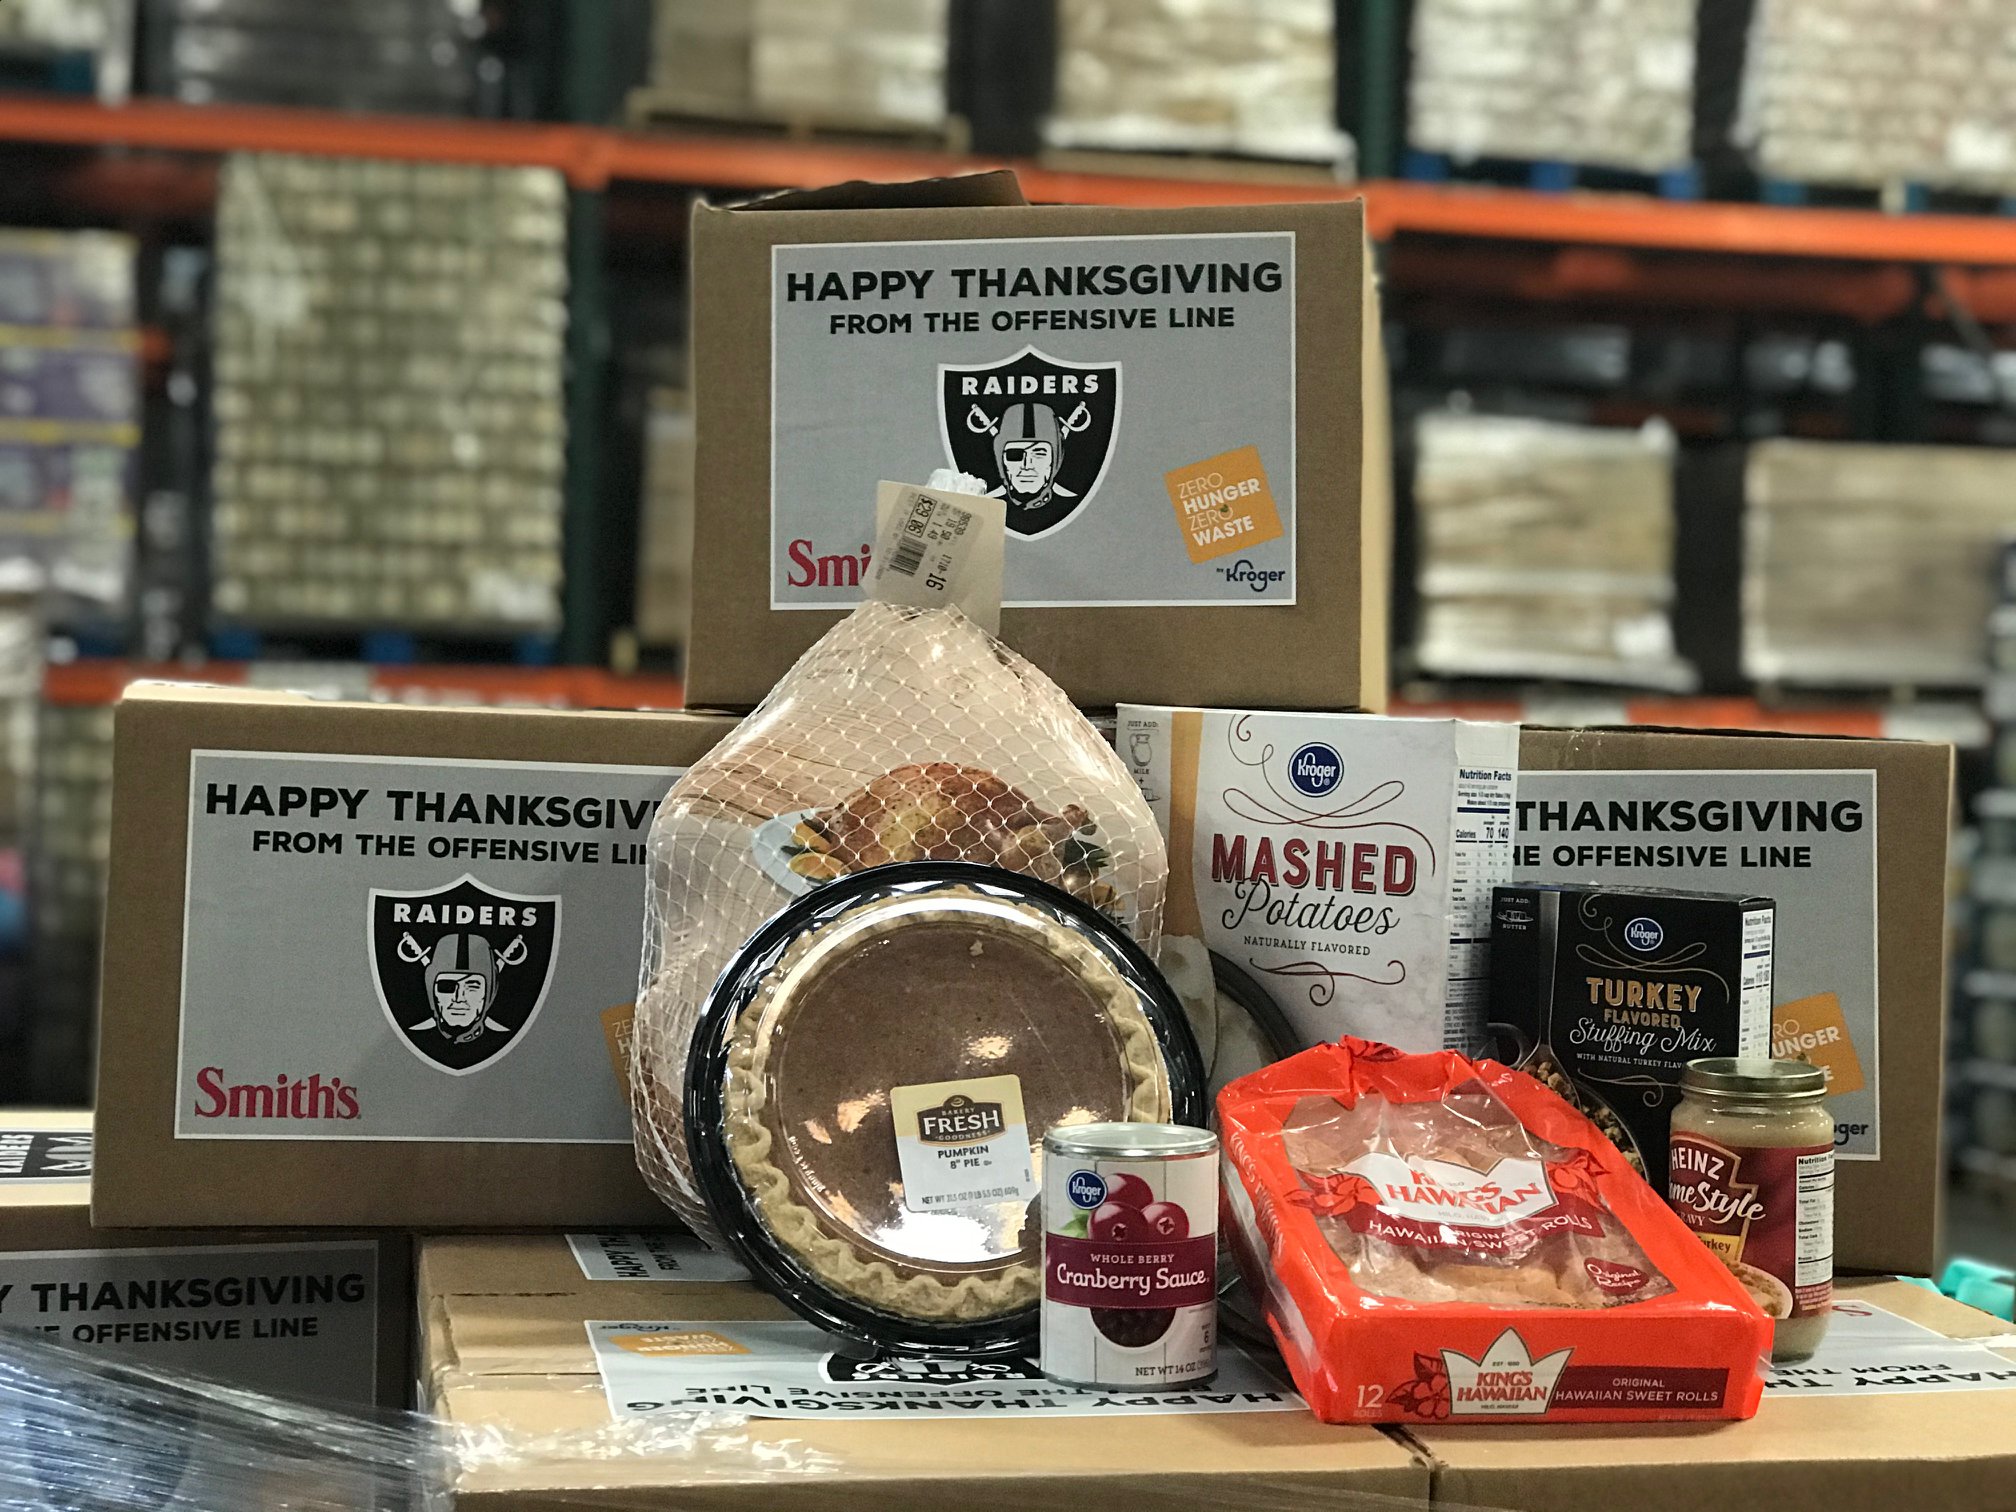 Raiders-themed Thanksgiving meal packages from Smiths